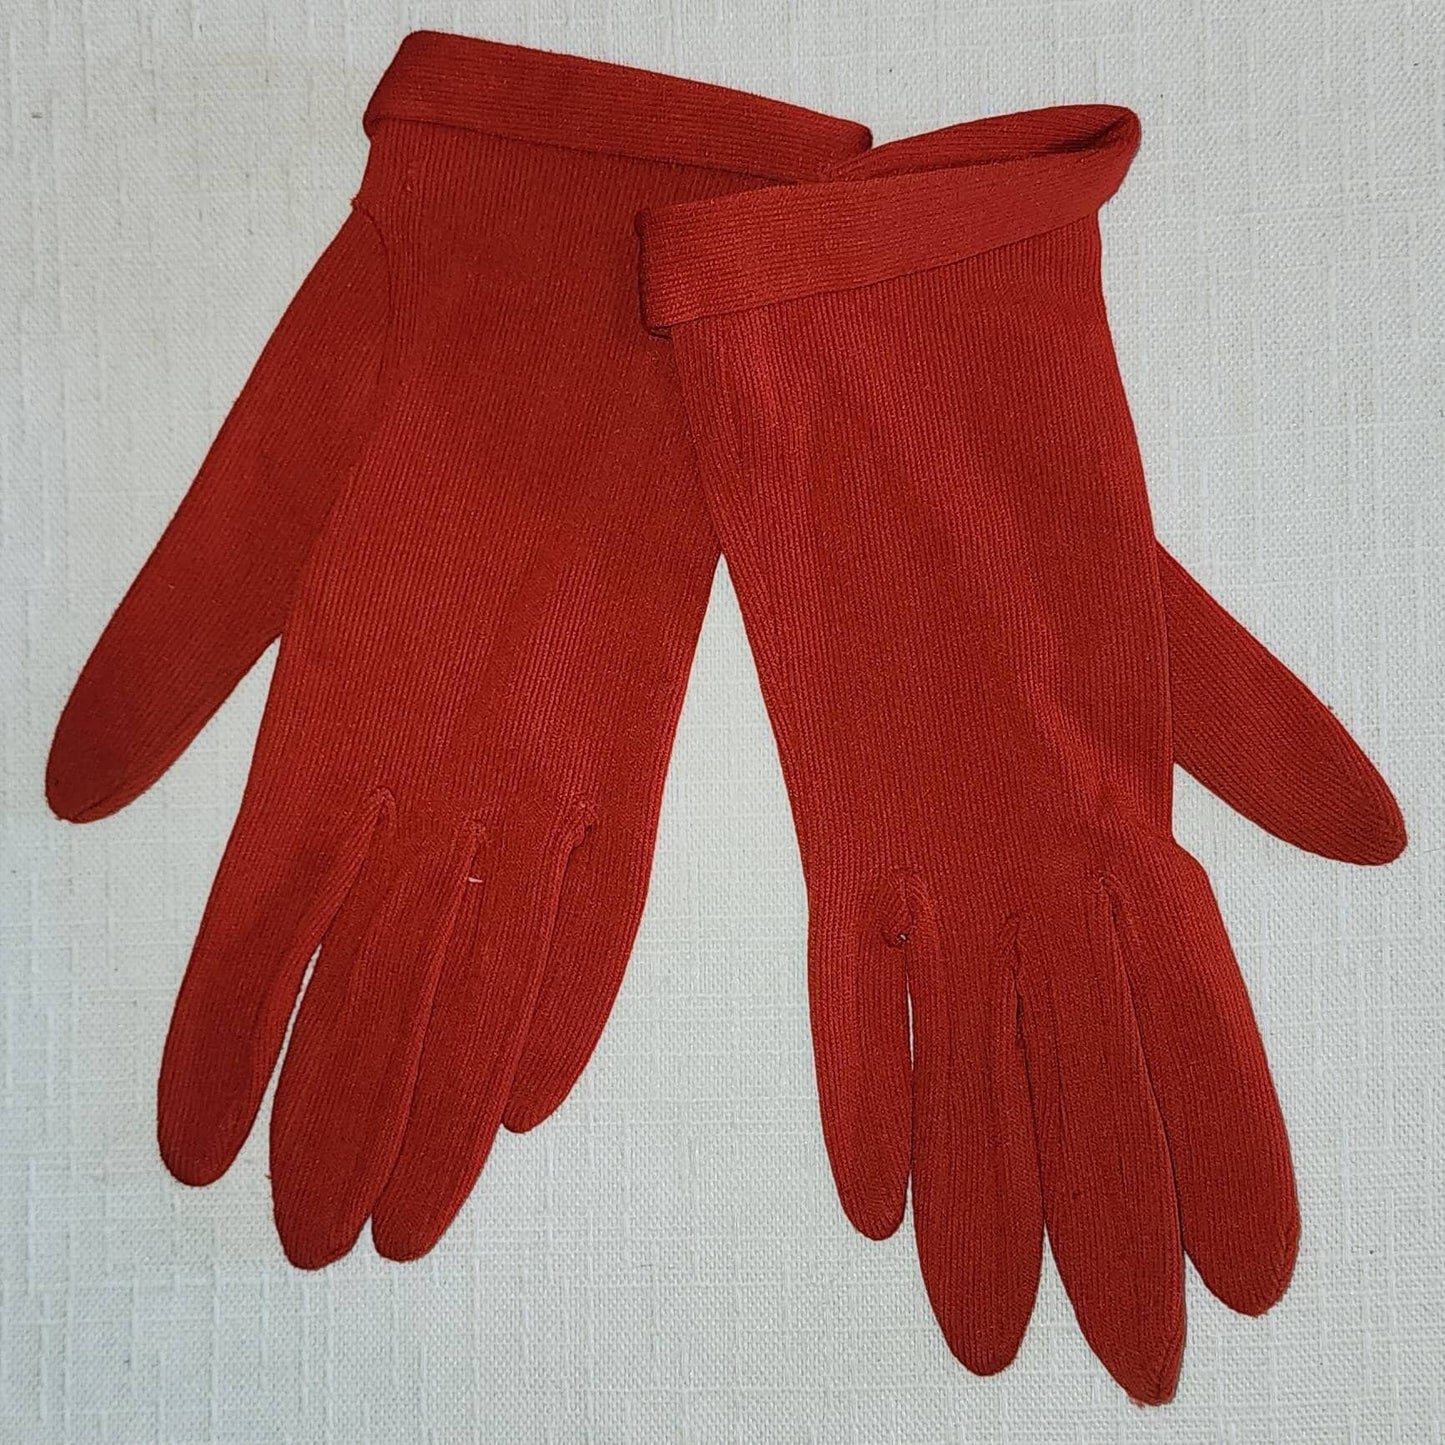 Vintage Red Gloves 1950s Bright Red Ribbed Nylon Wrist Gloves Mid Century Rockabilly Pinup Boho